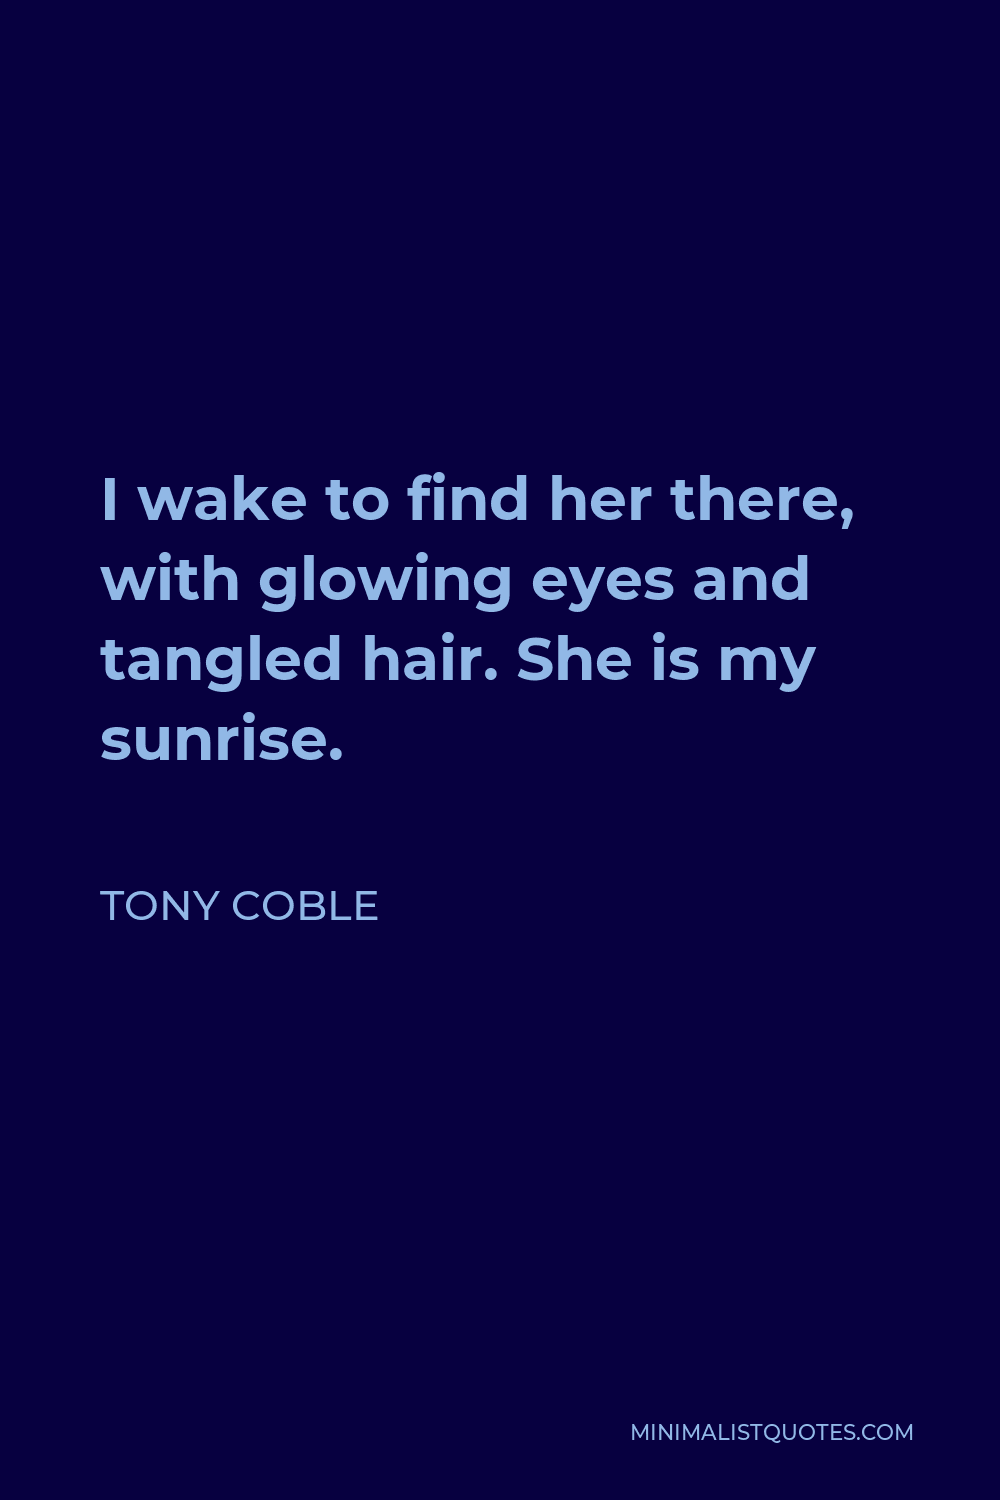 Tony Coble Quote - I wake to find her there, with glowing eyes and tangled hair. She is my sunrise.